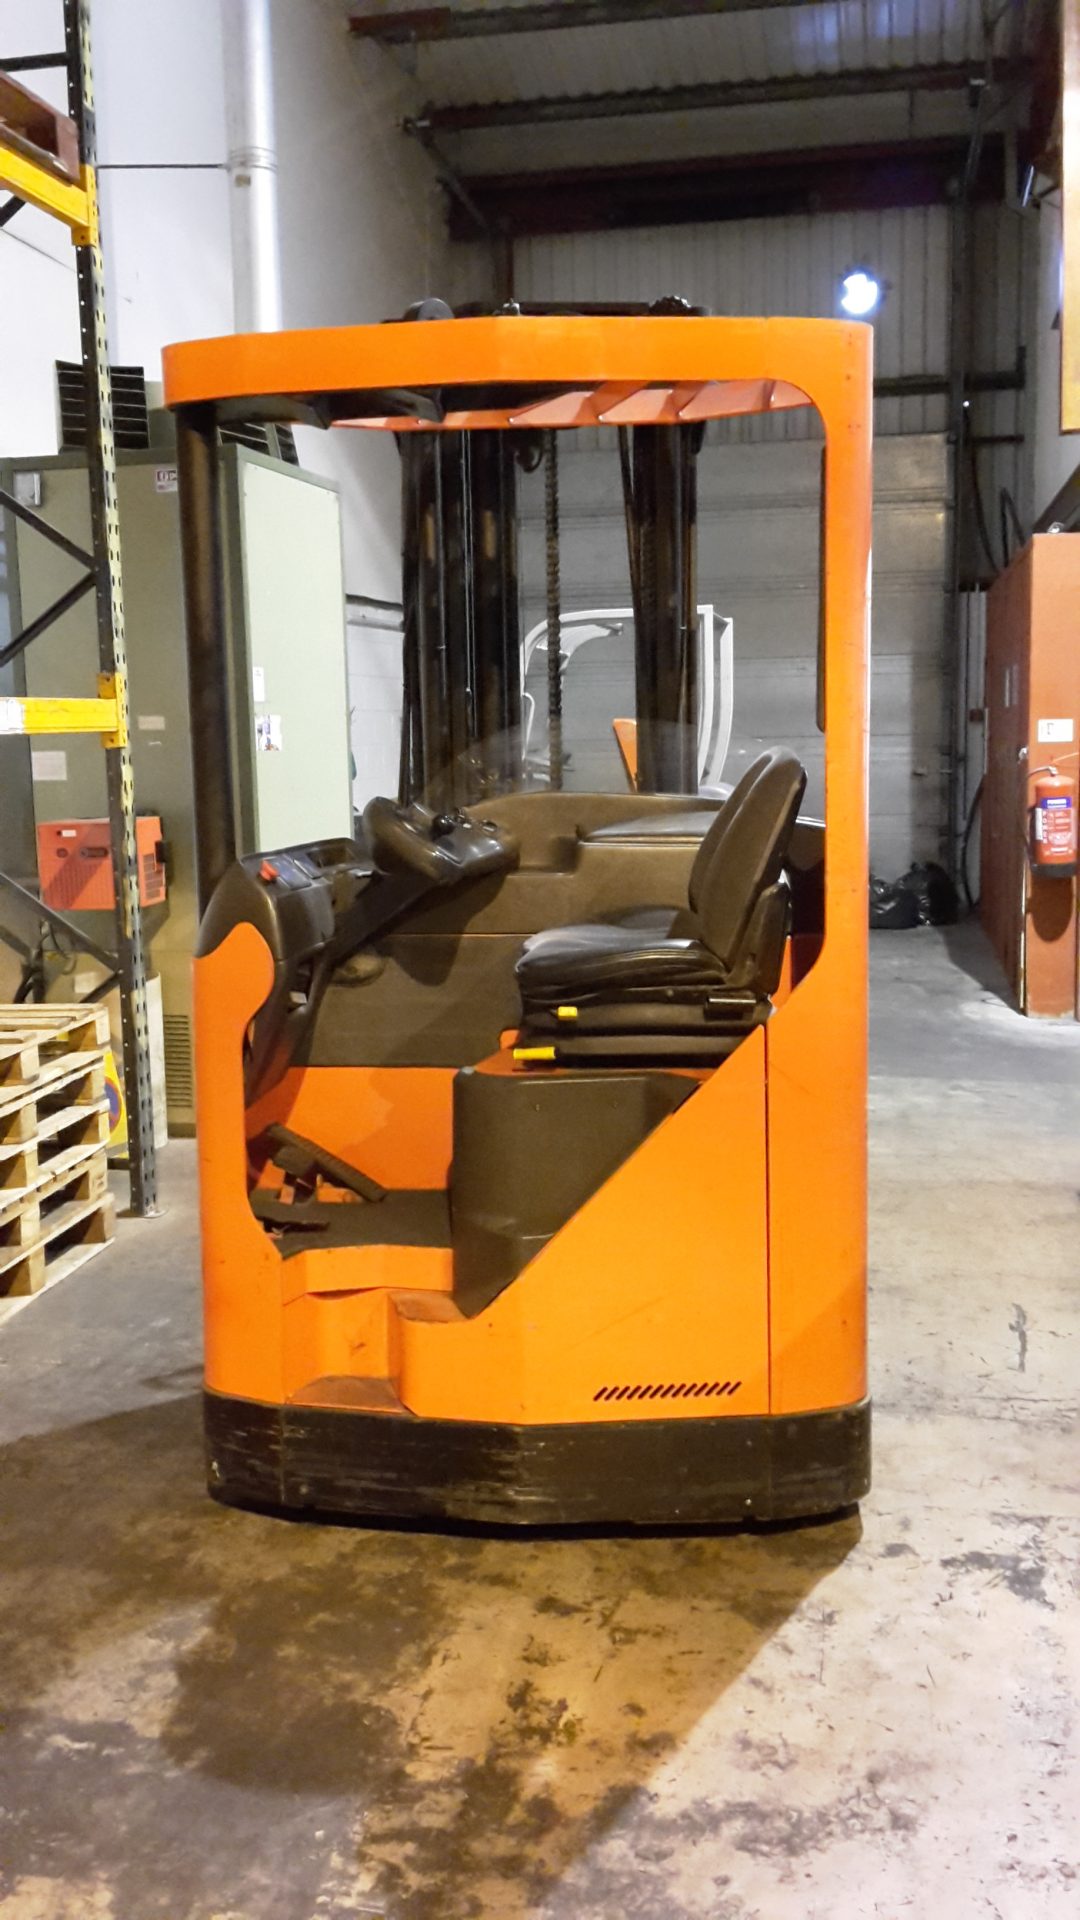 Free study material Counterbalance/Reach Forklift DGC Training Services